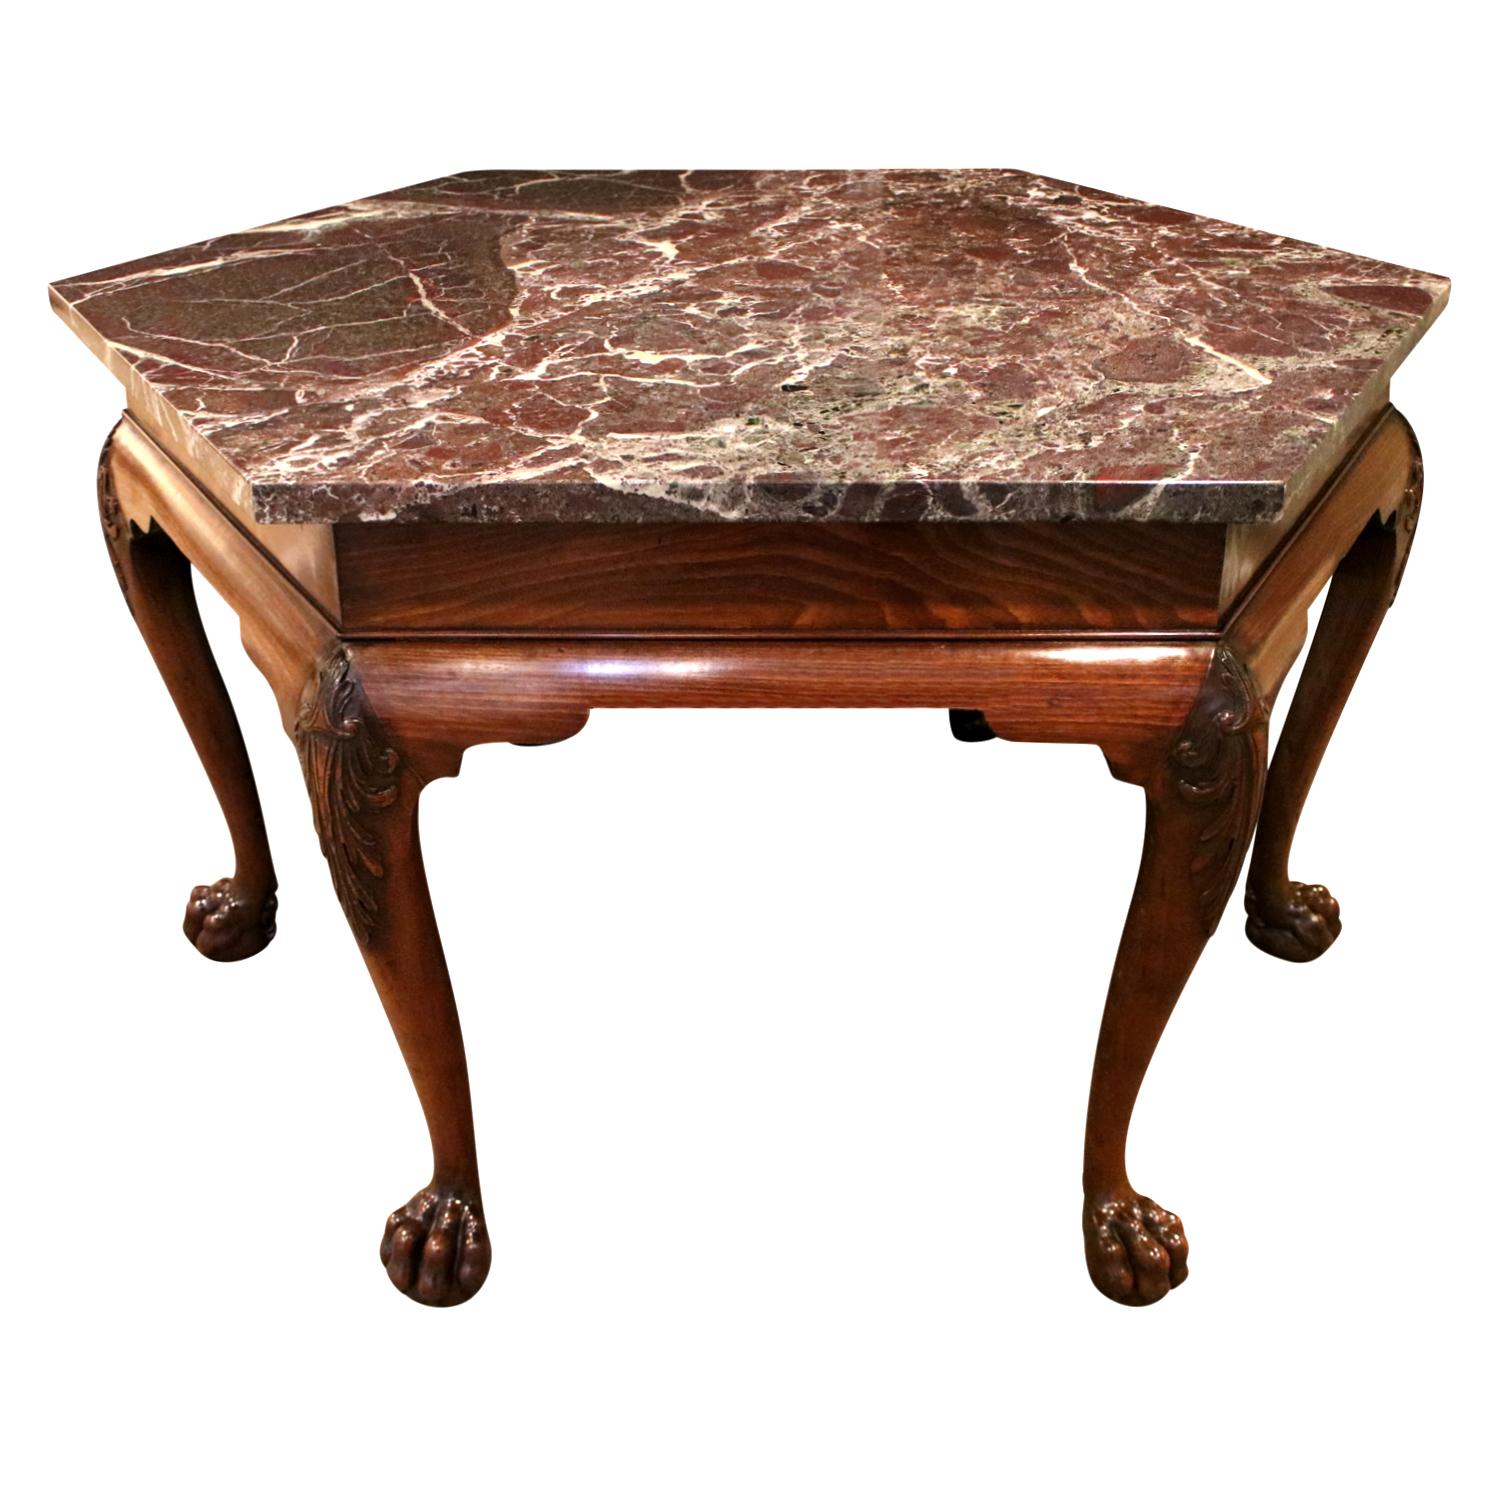 Exceptional hand-crafted Chippendale center/hall table, hexagonal with cabriole legs and claw feet with exquisitely carved details and figured marble top, America 18th Century. This table is rare and special.